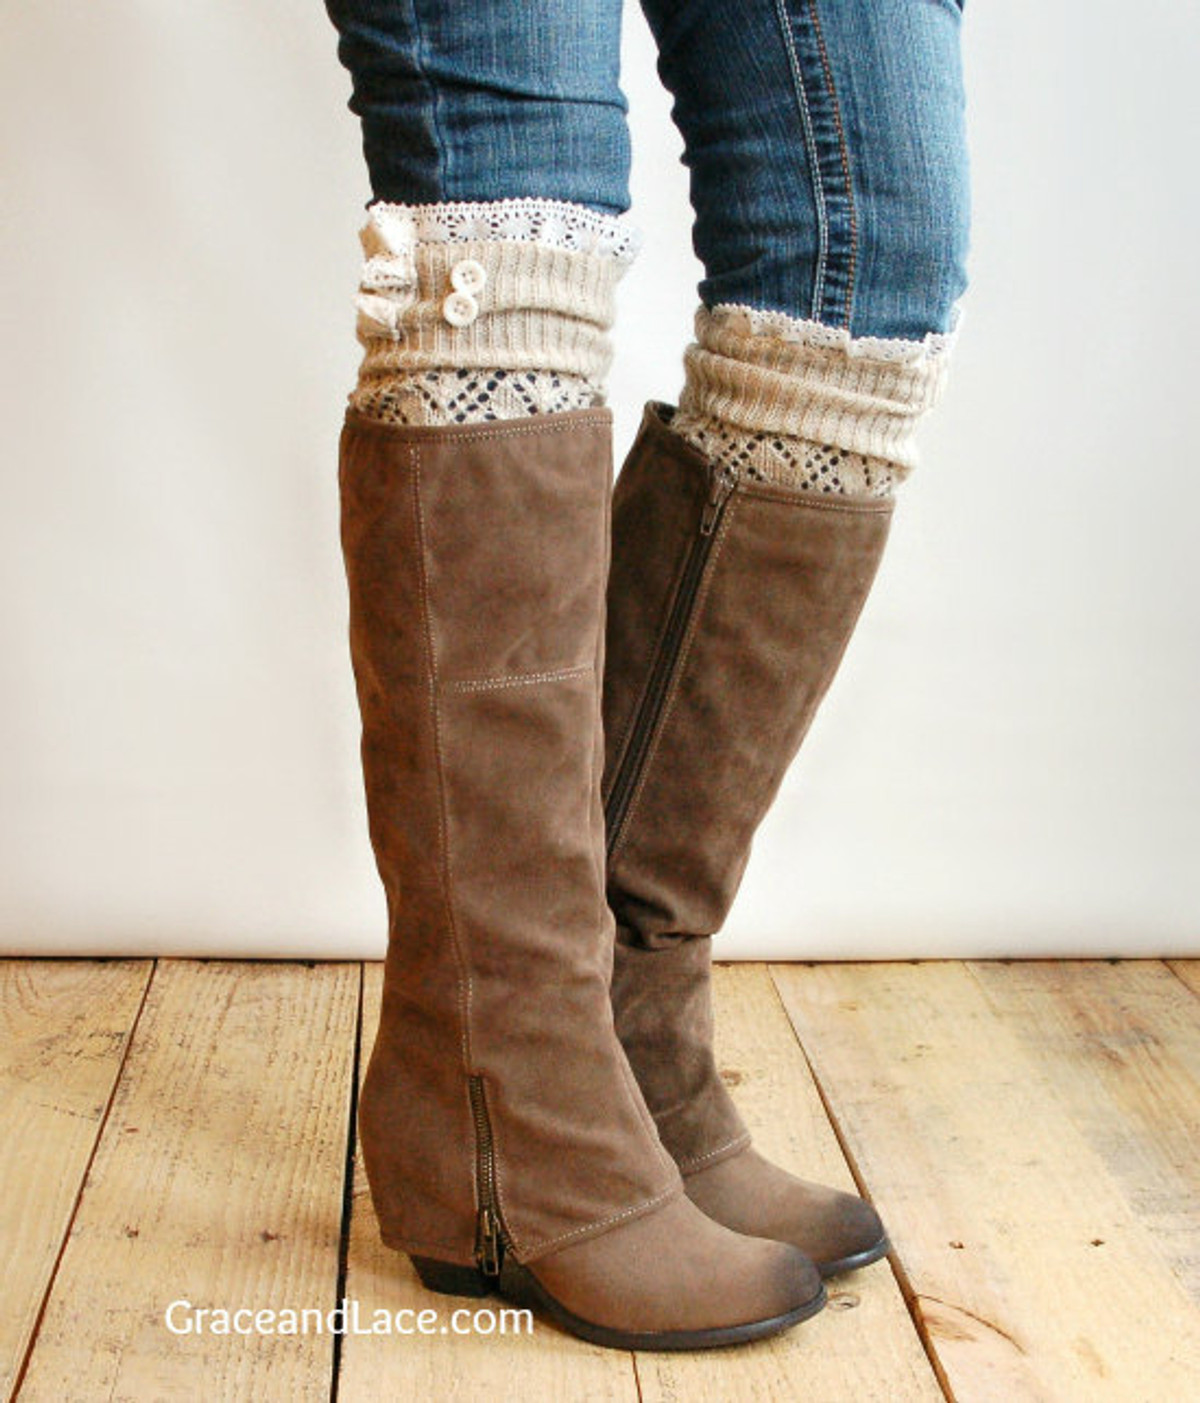 Grace and Lace The Lacey Lou Boot Cuff Leg Warmer - Tan - Sublime